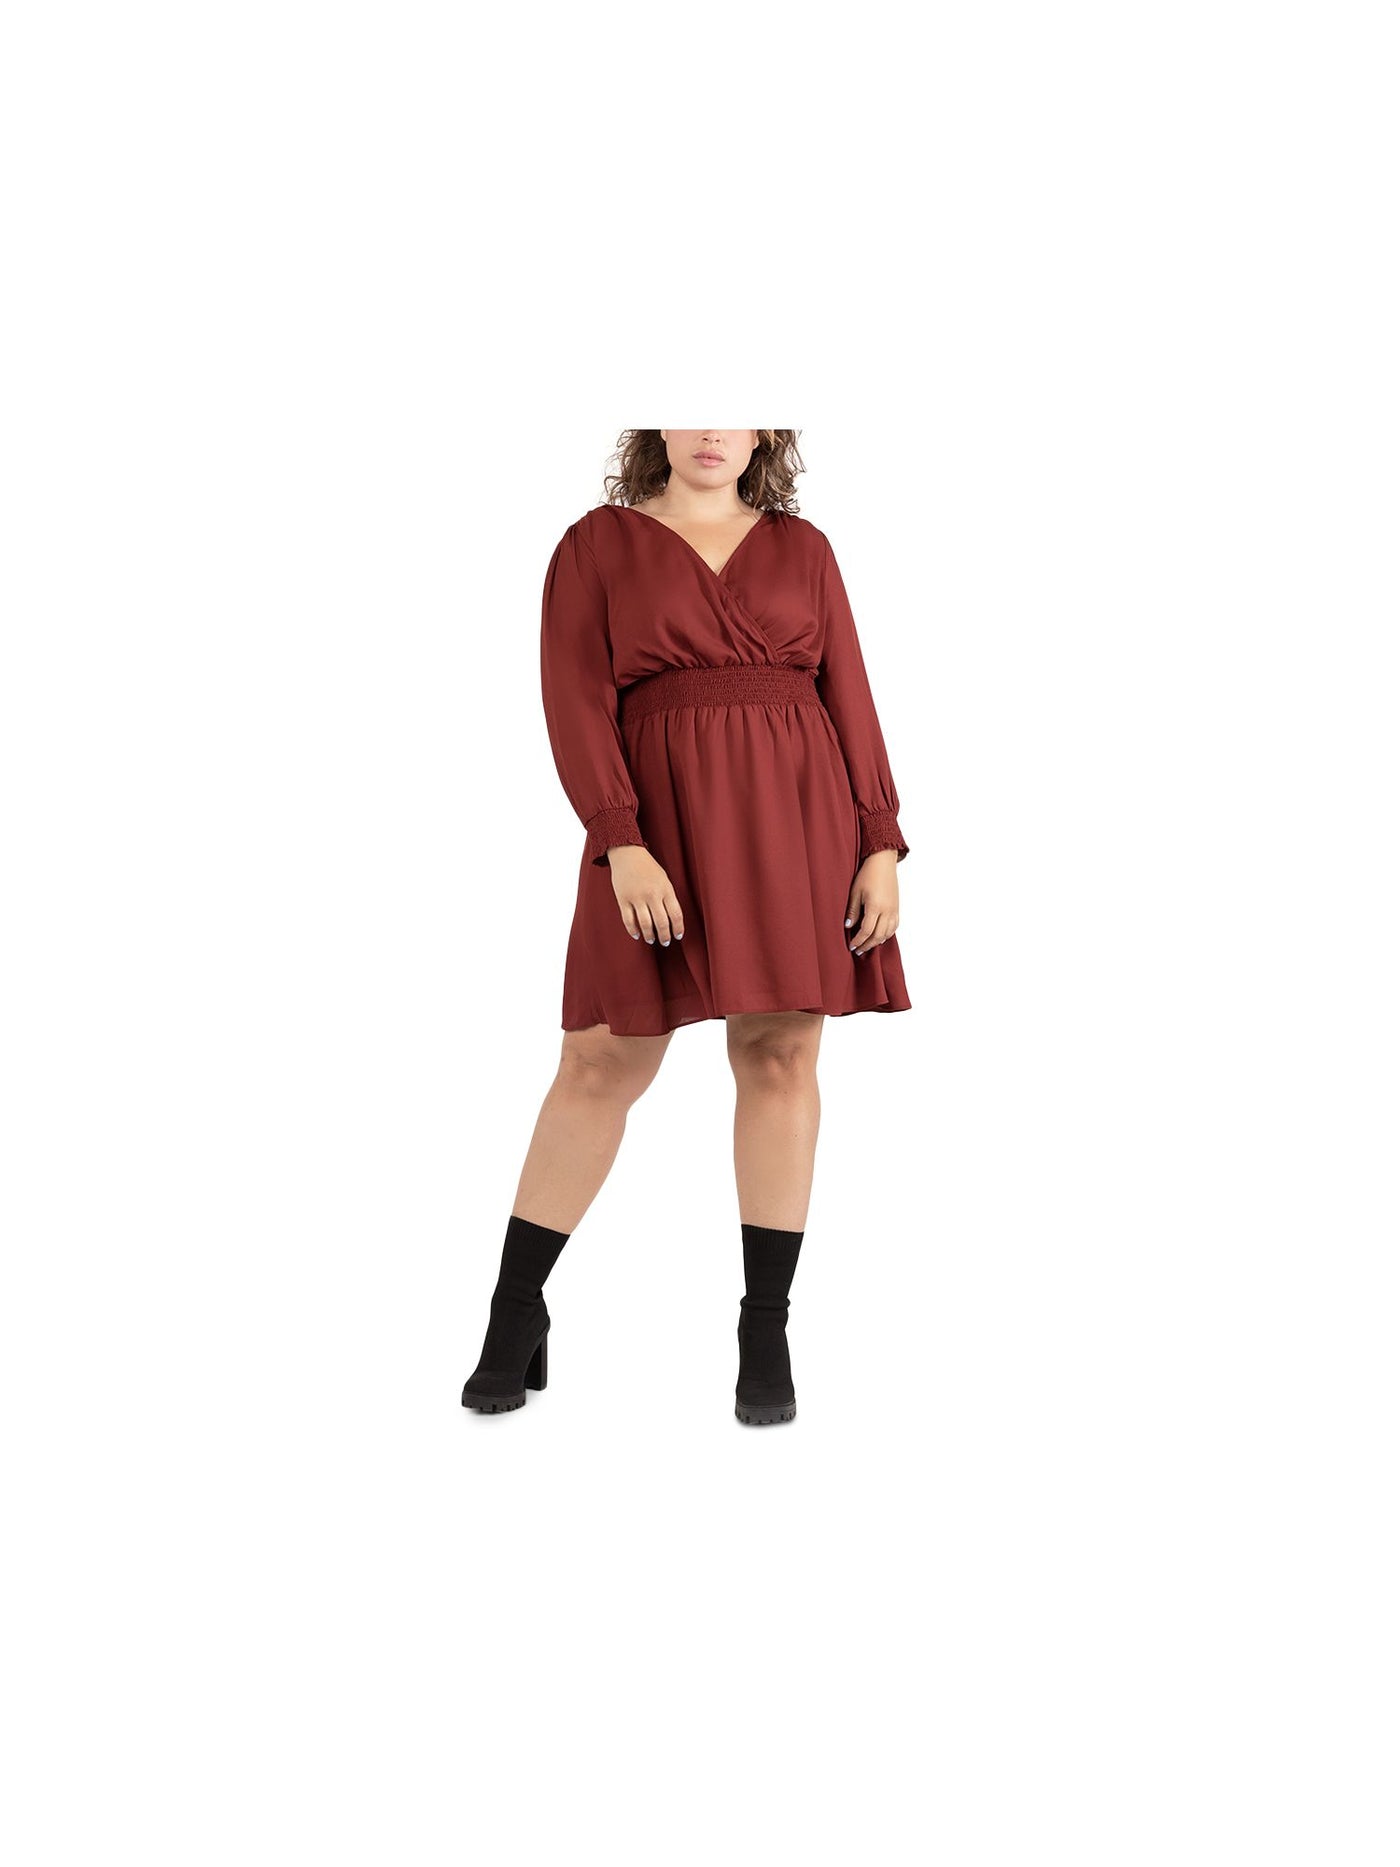 BLACK TAPE Womens Maroon Gathered Smocked Waist And Cuffs Long Sleeve Surplice Neckline Above The Knee Fit + Flare Dress Plus X